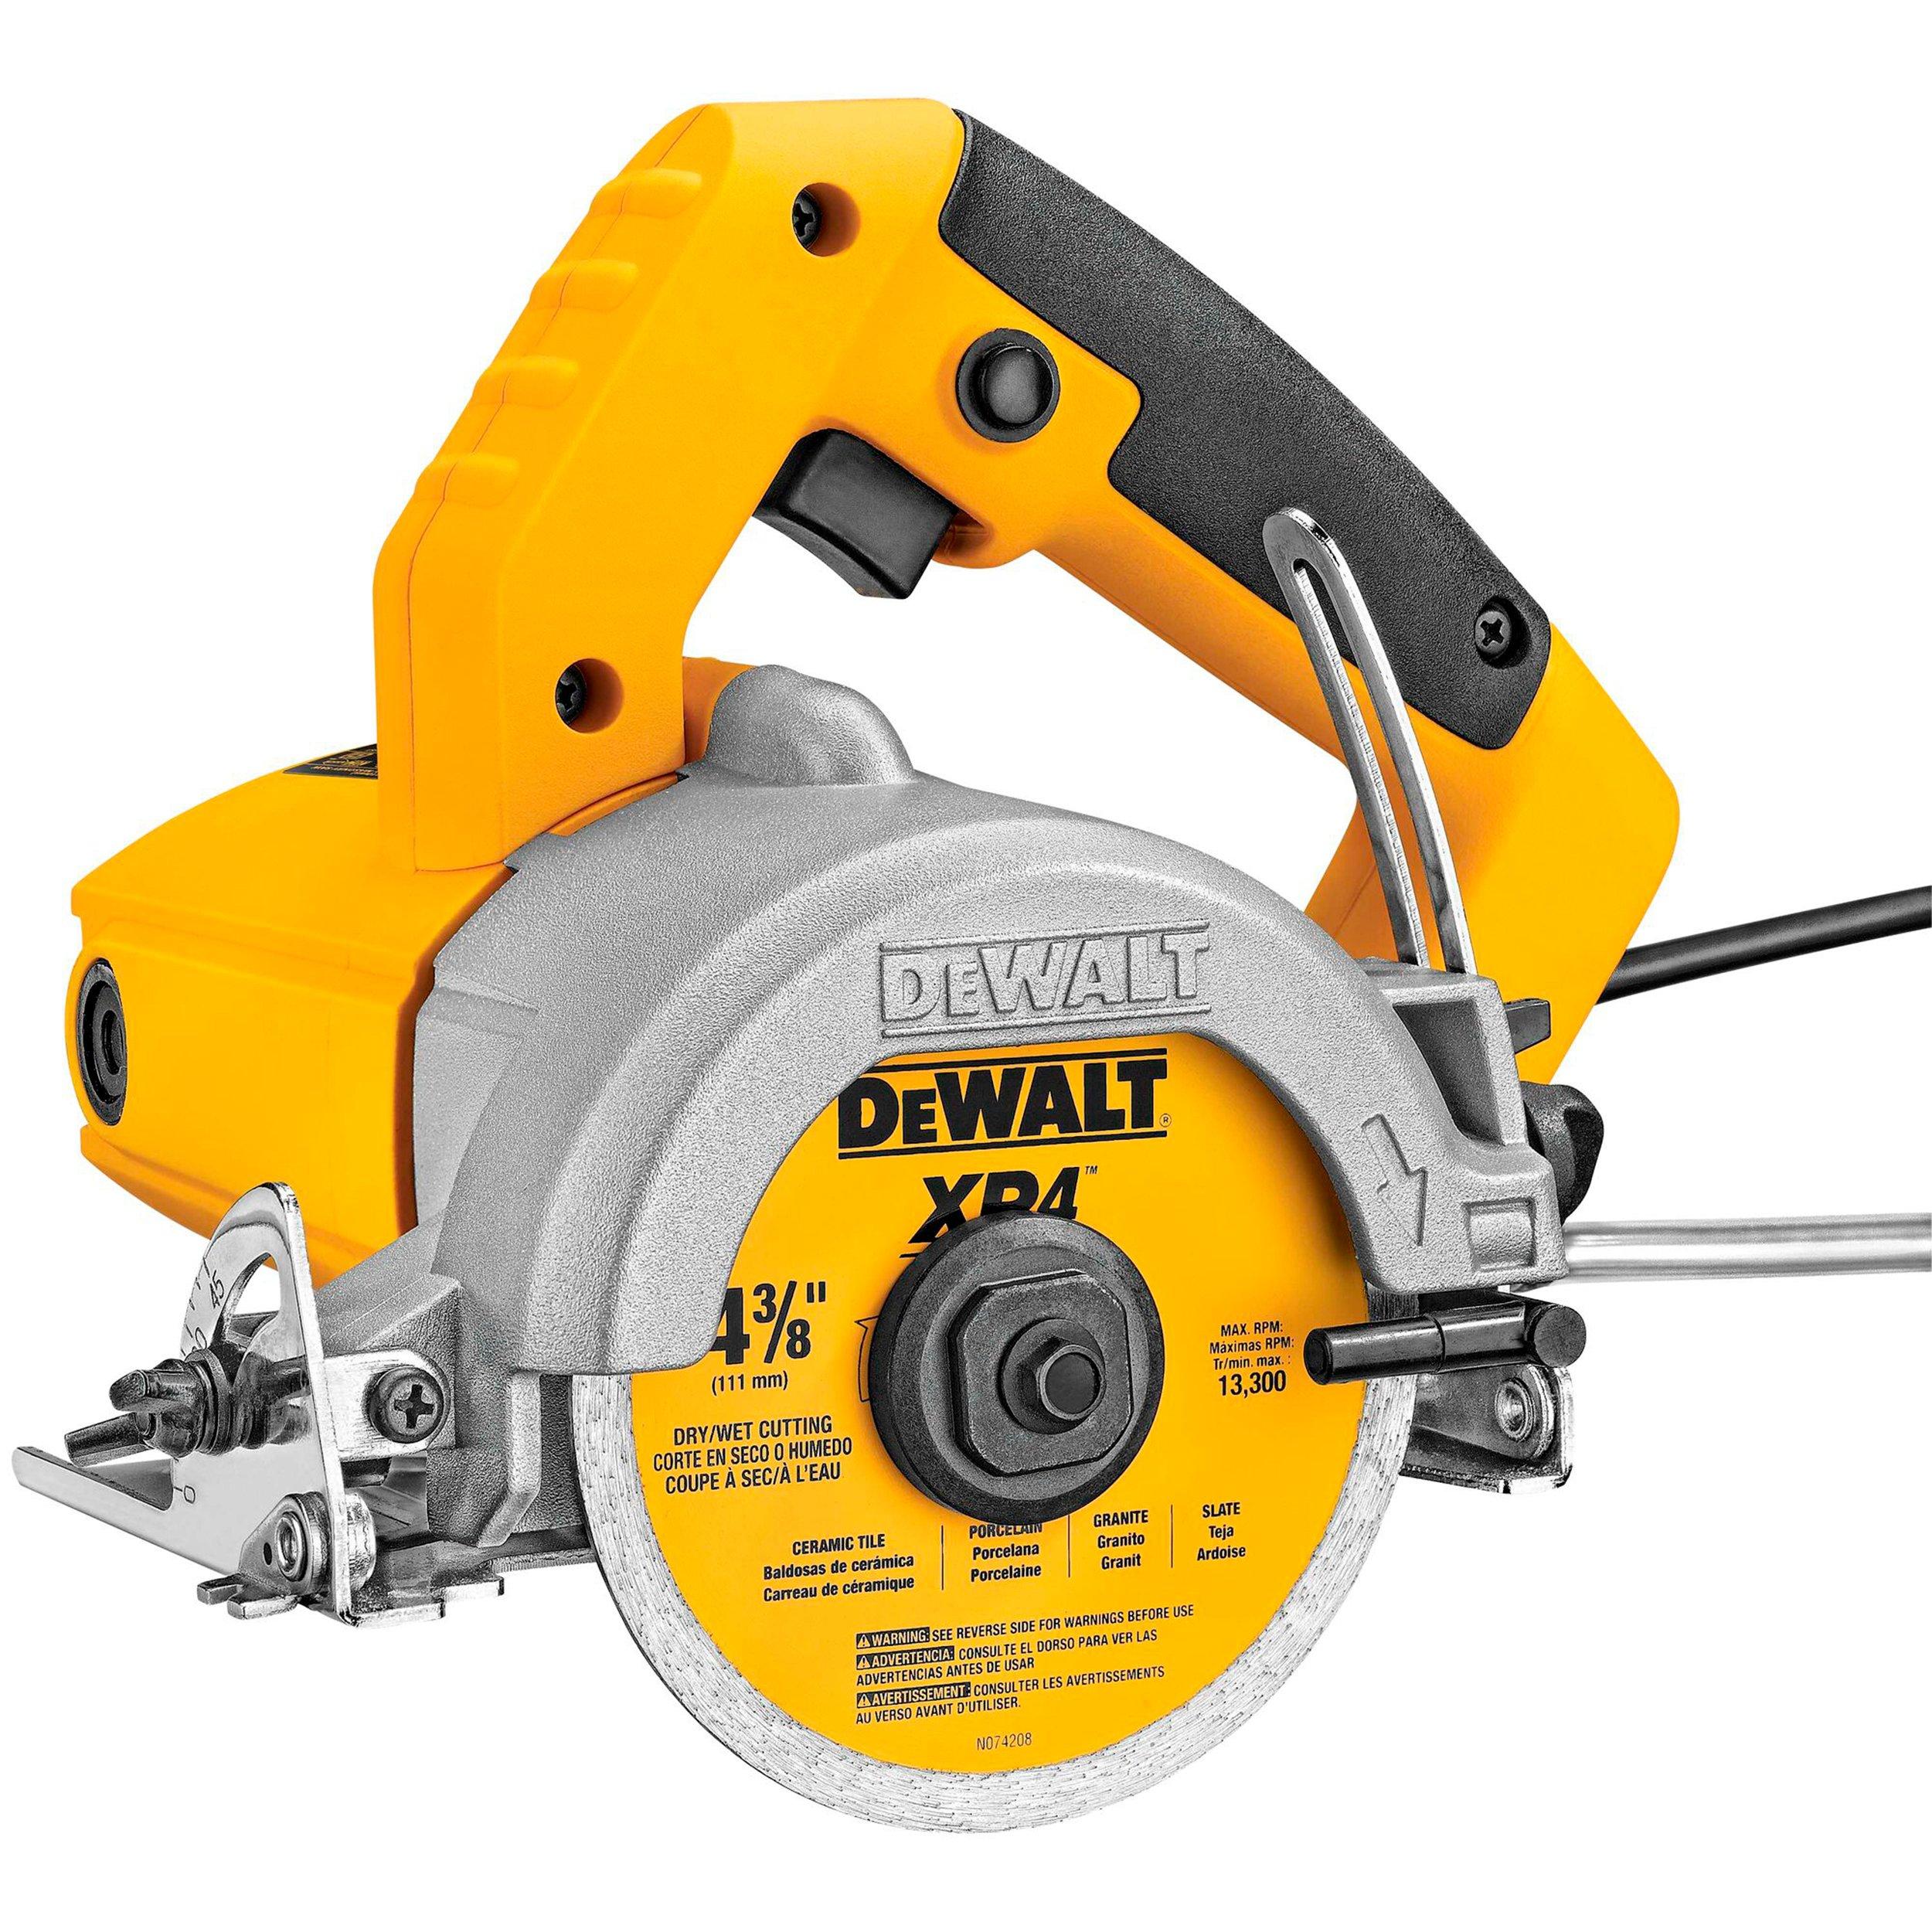 Wet Saw For Cutting Granite Portugal, SAVE 40%